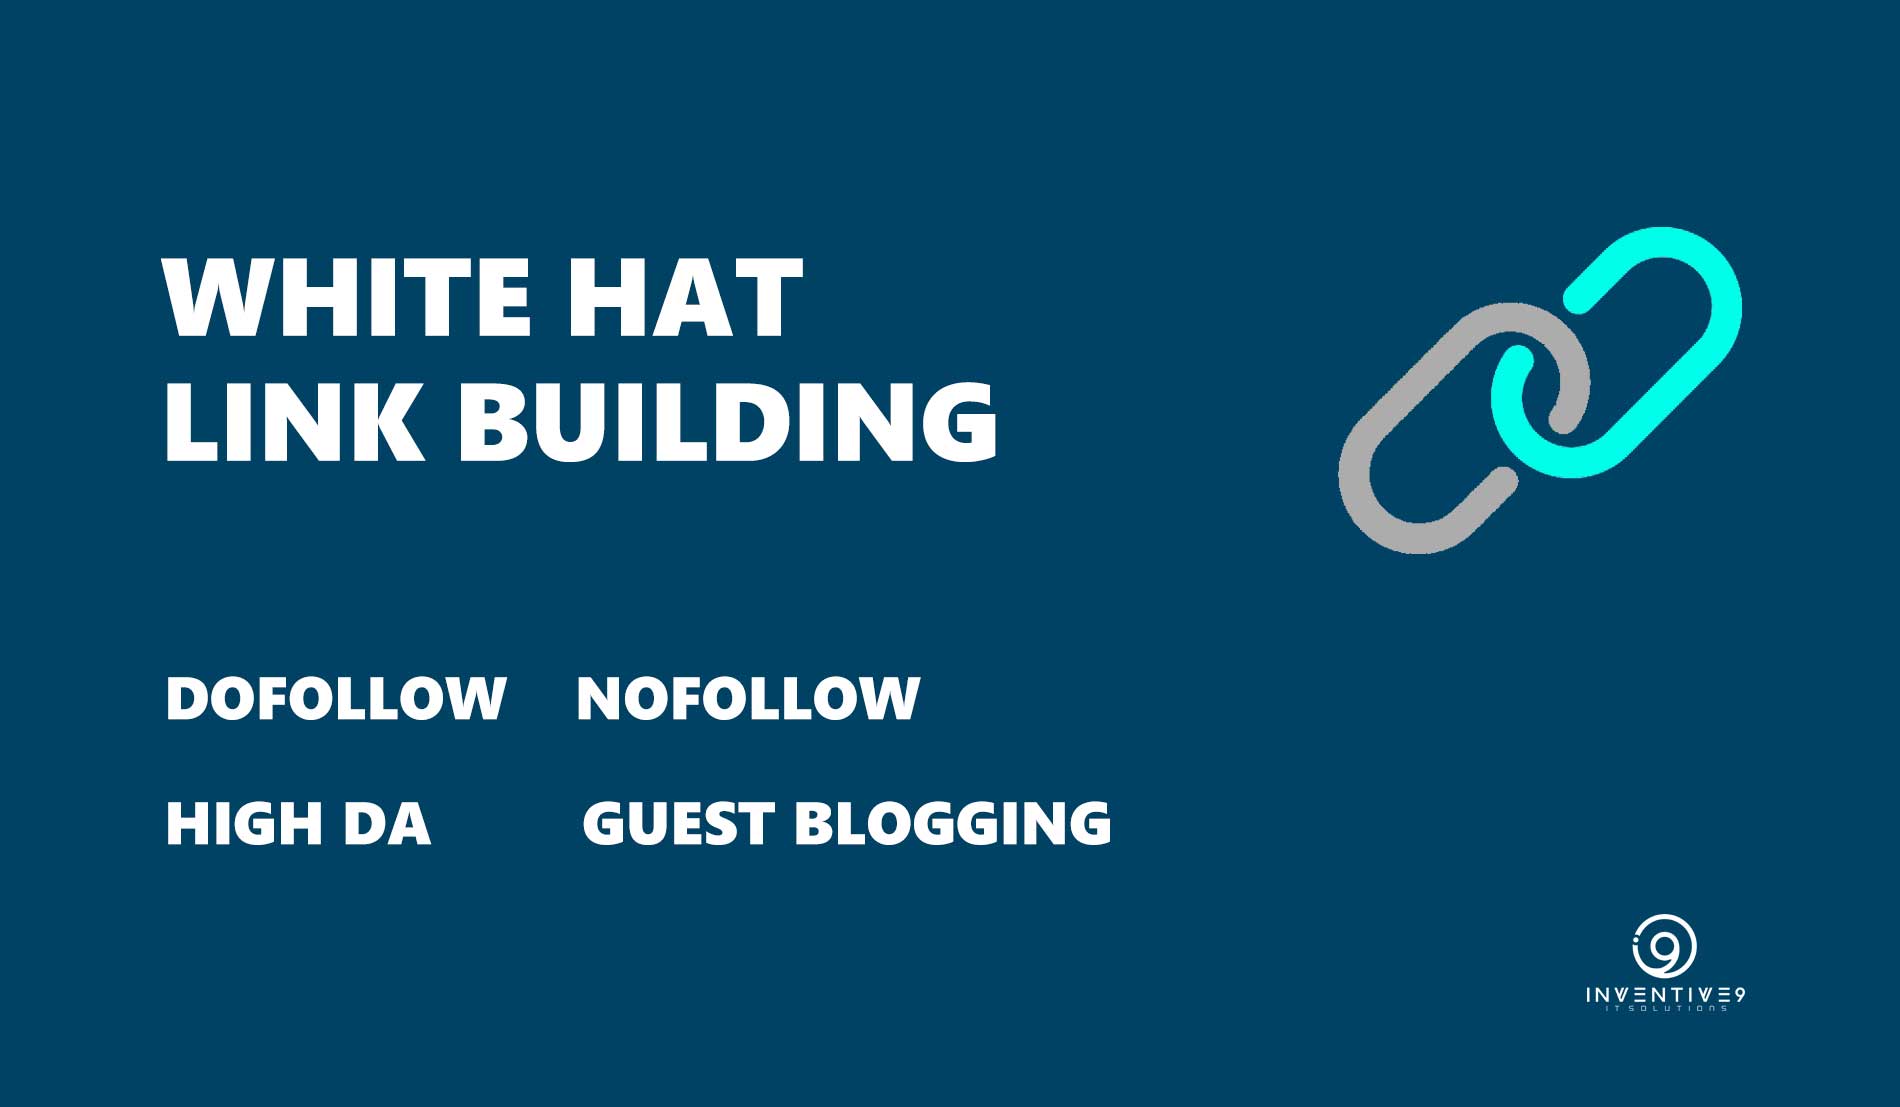 White hat link building